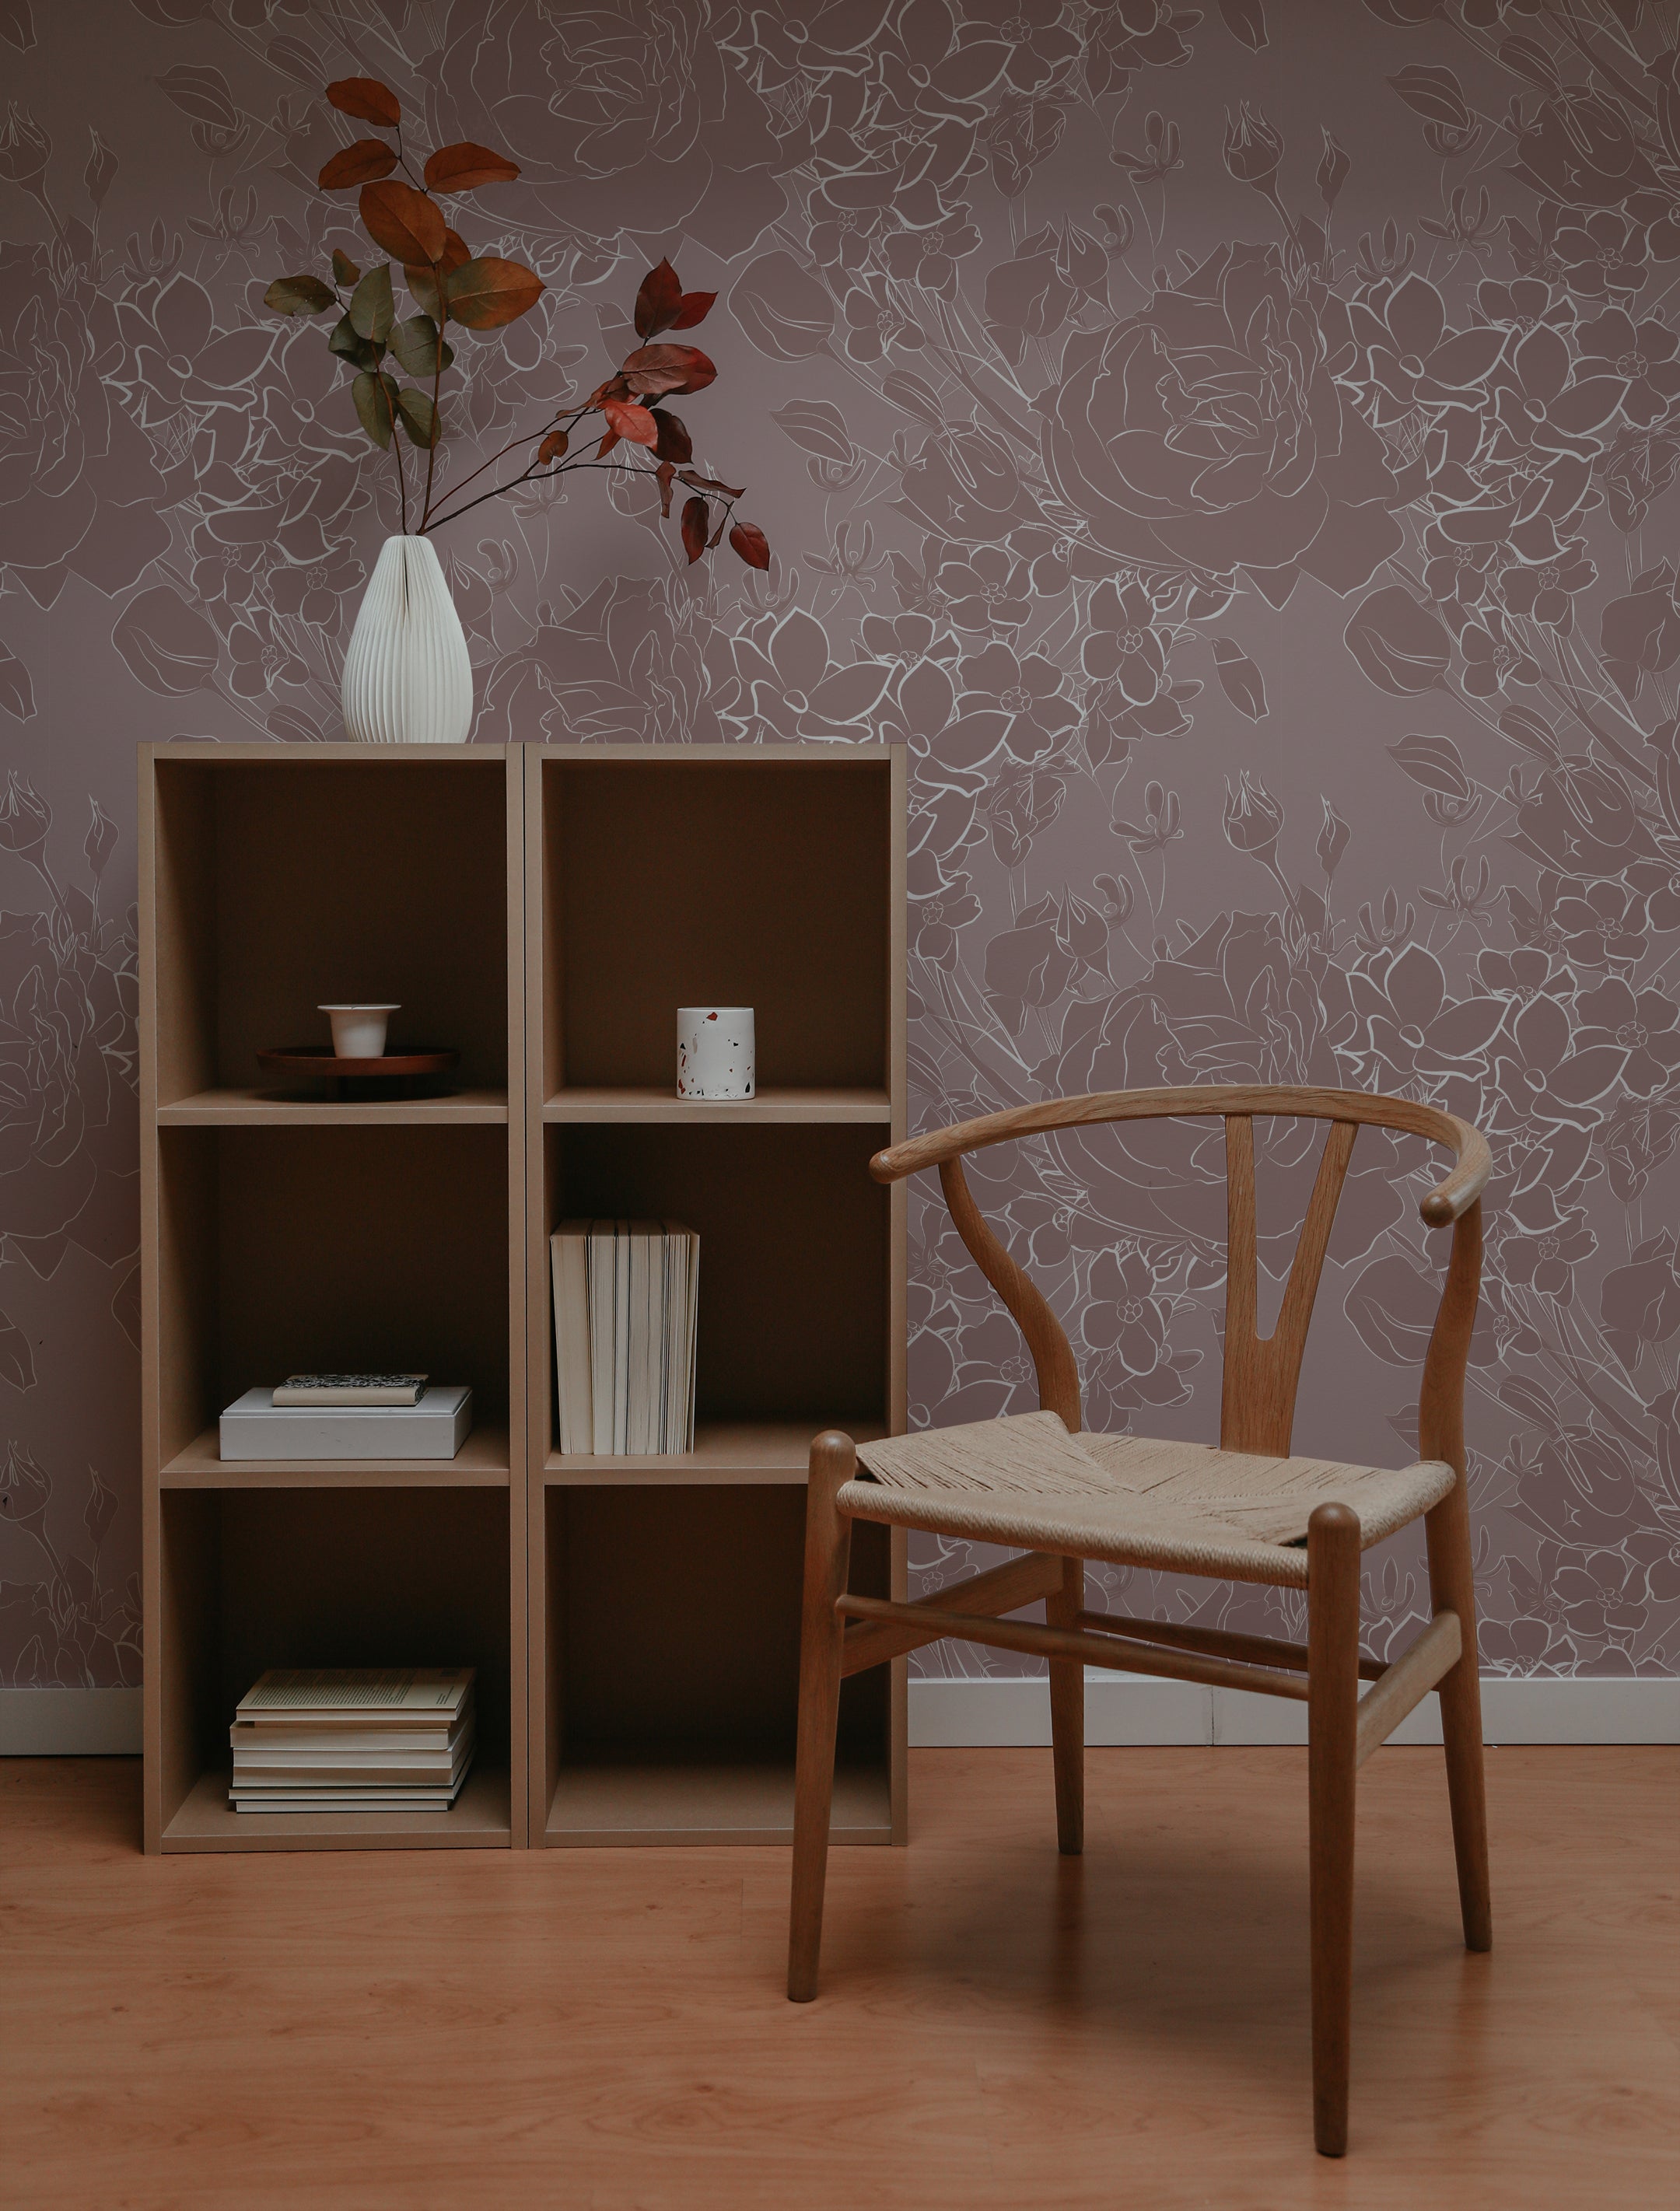 A cozy reading nook with Dusty Rose Floral Wallpaper adorning the wall, complemented by a simple wooden chair and a shelving unit filled with books. The soft pink background and white floral patterns evoke a serene, inviting space